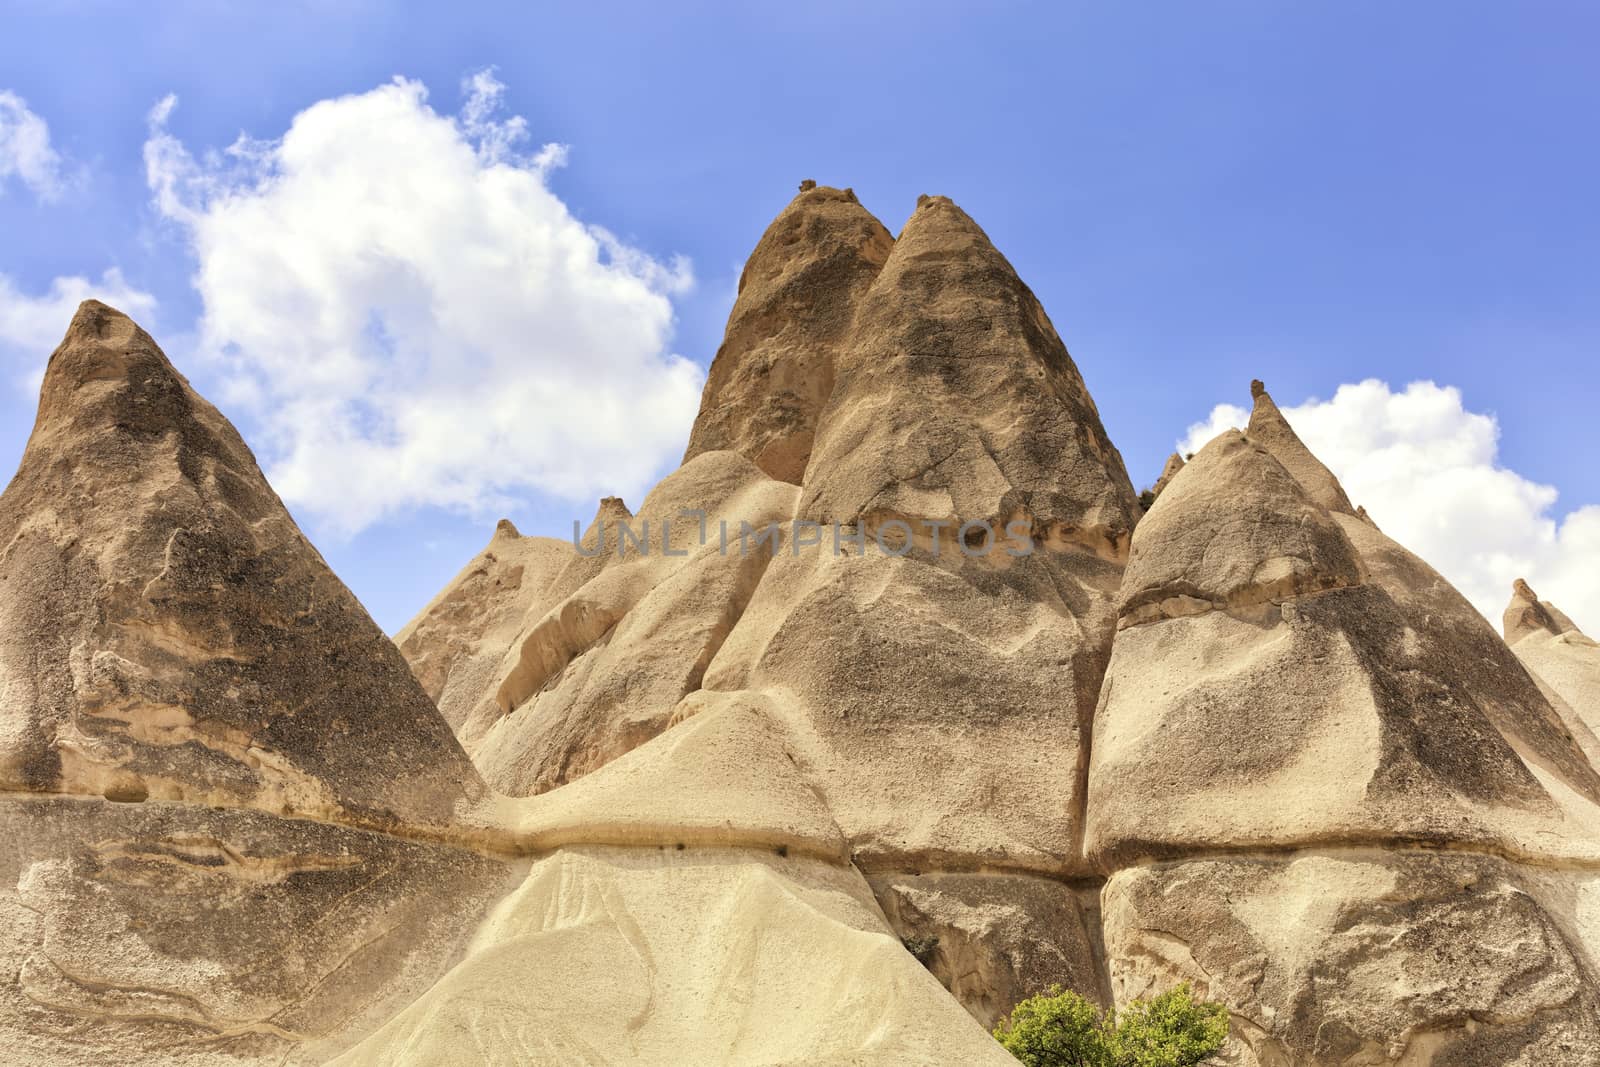 Mountain peaks of sandstone in the mountains of Cappadocia against the blue sky and white clouds.